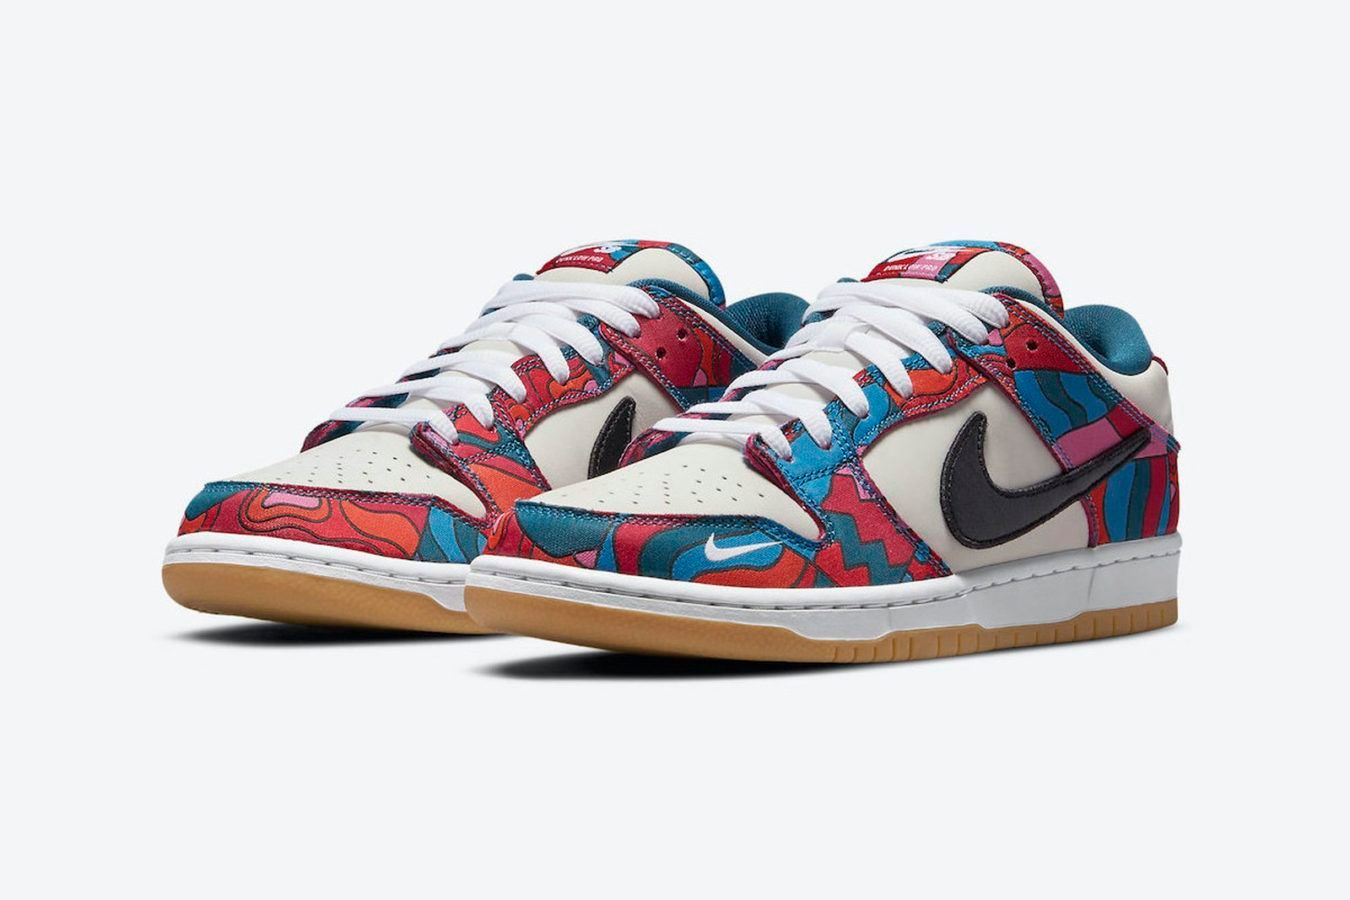 How to cop the Parra x Nike SB Dunk Low Olympic special in